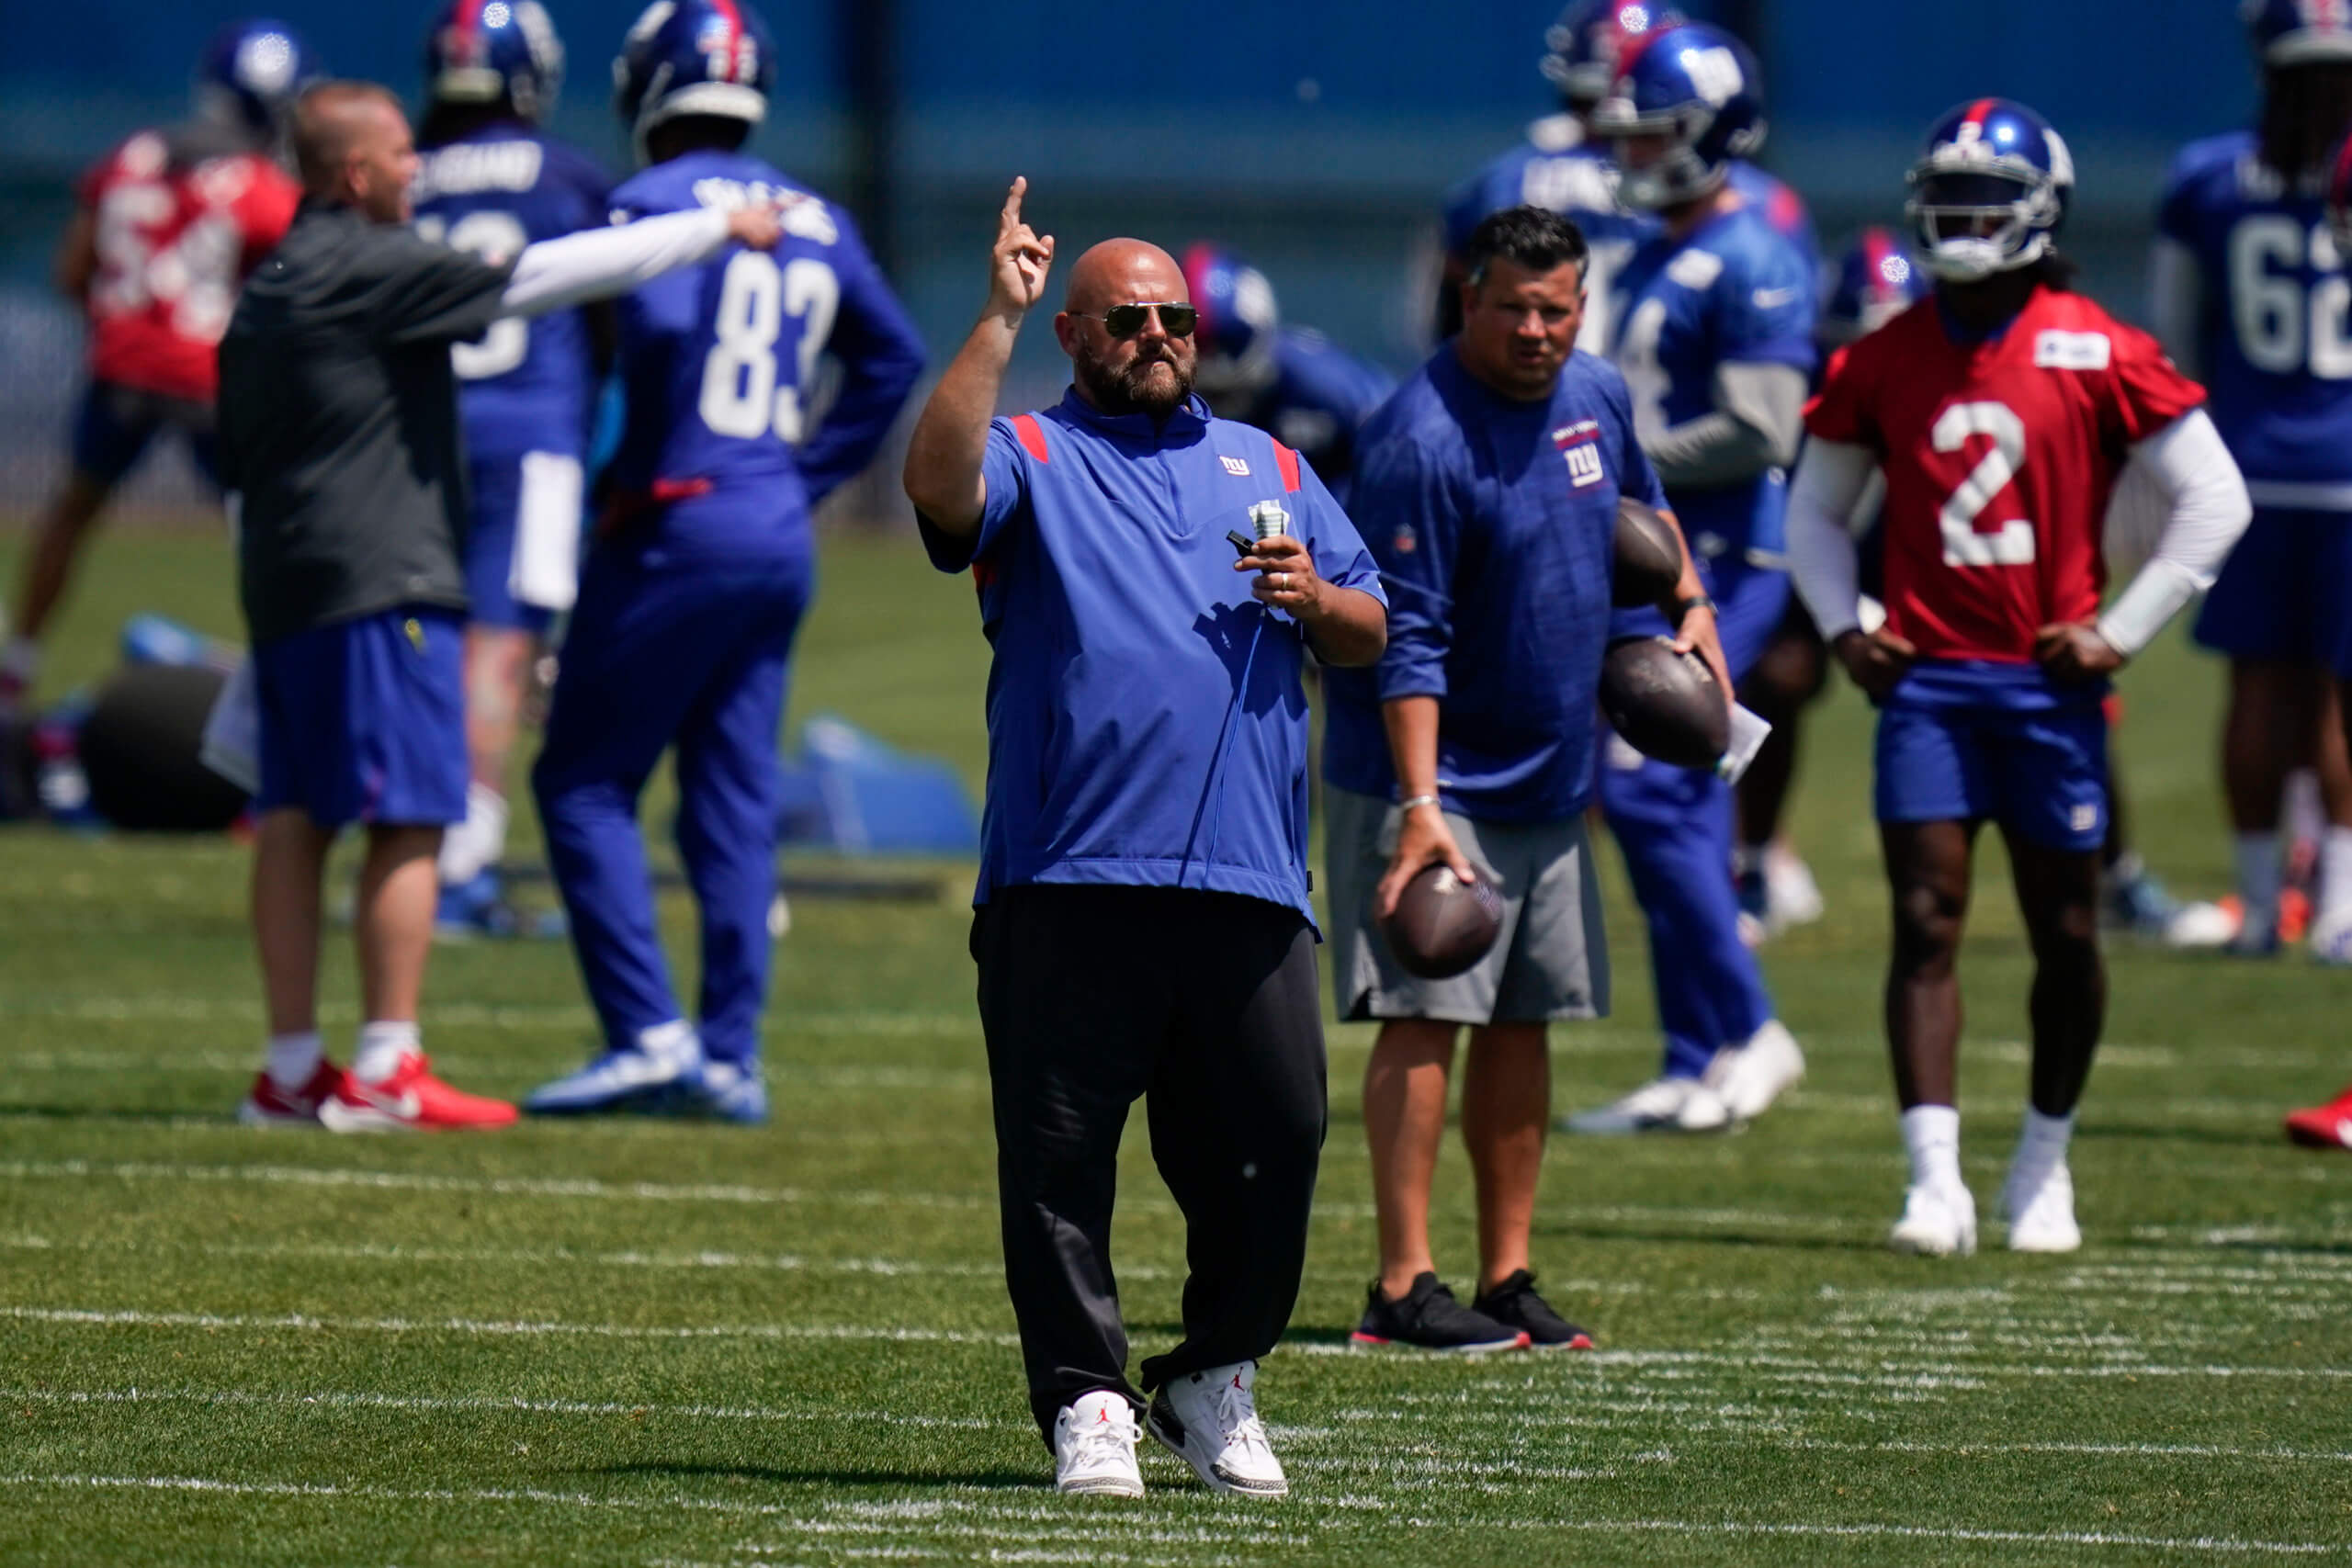 Giants head coach Brian Daboll looking to avoid repeat of 2005 brawl-filled  practice with Jets | amNewYork